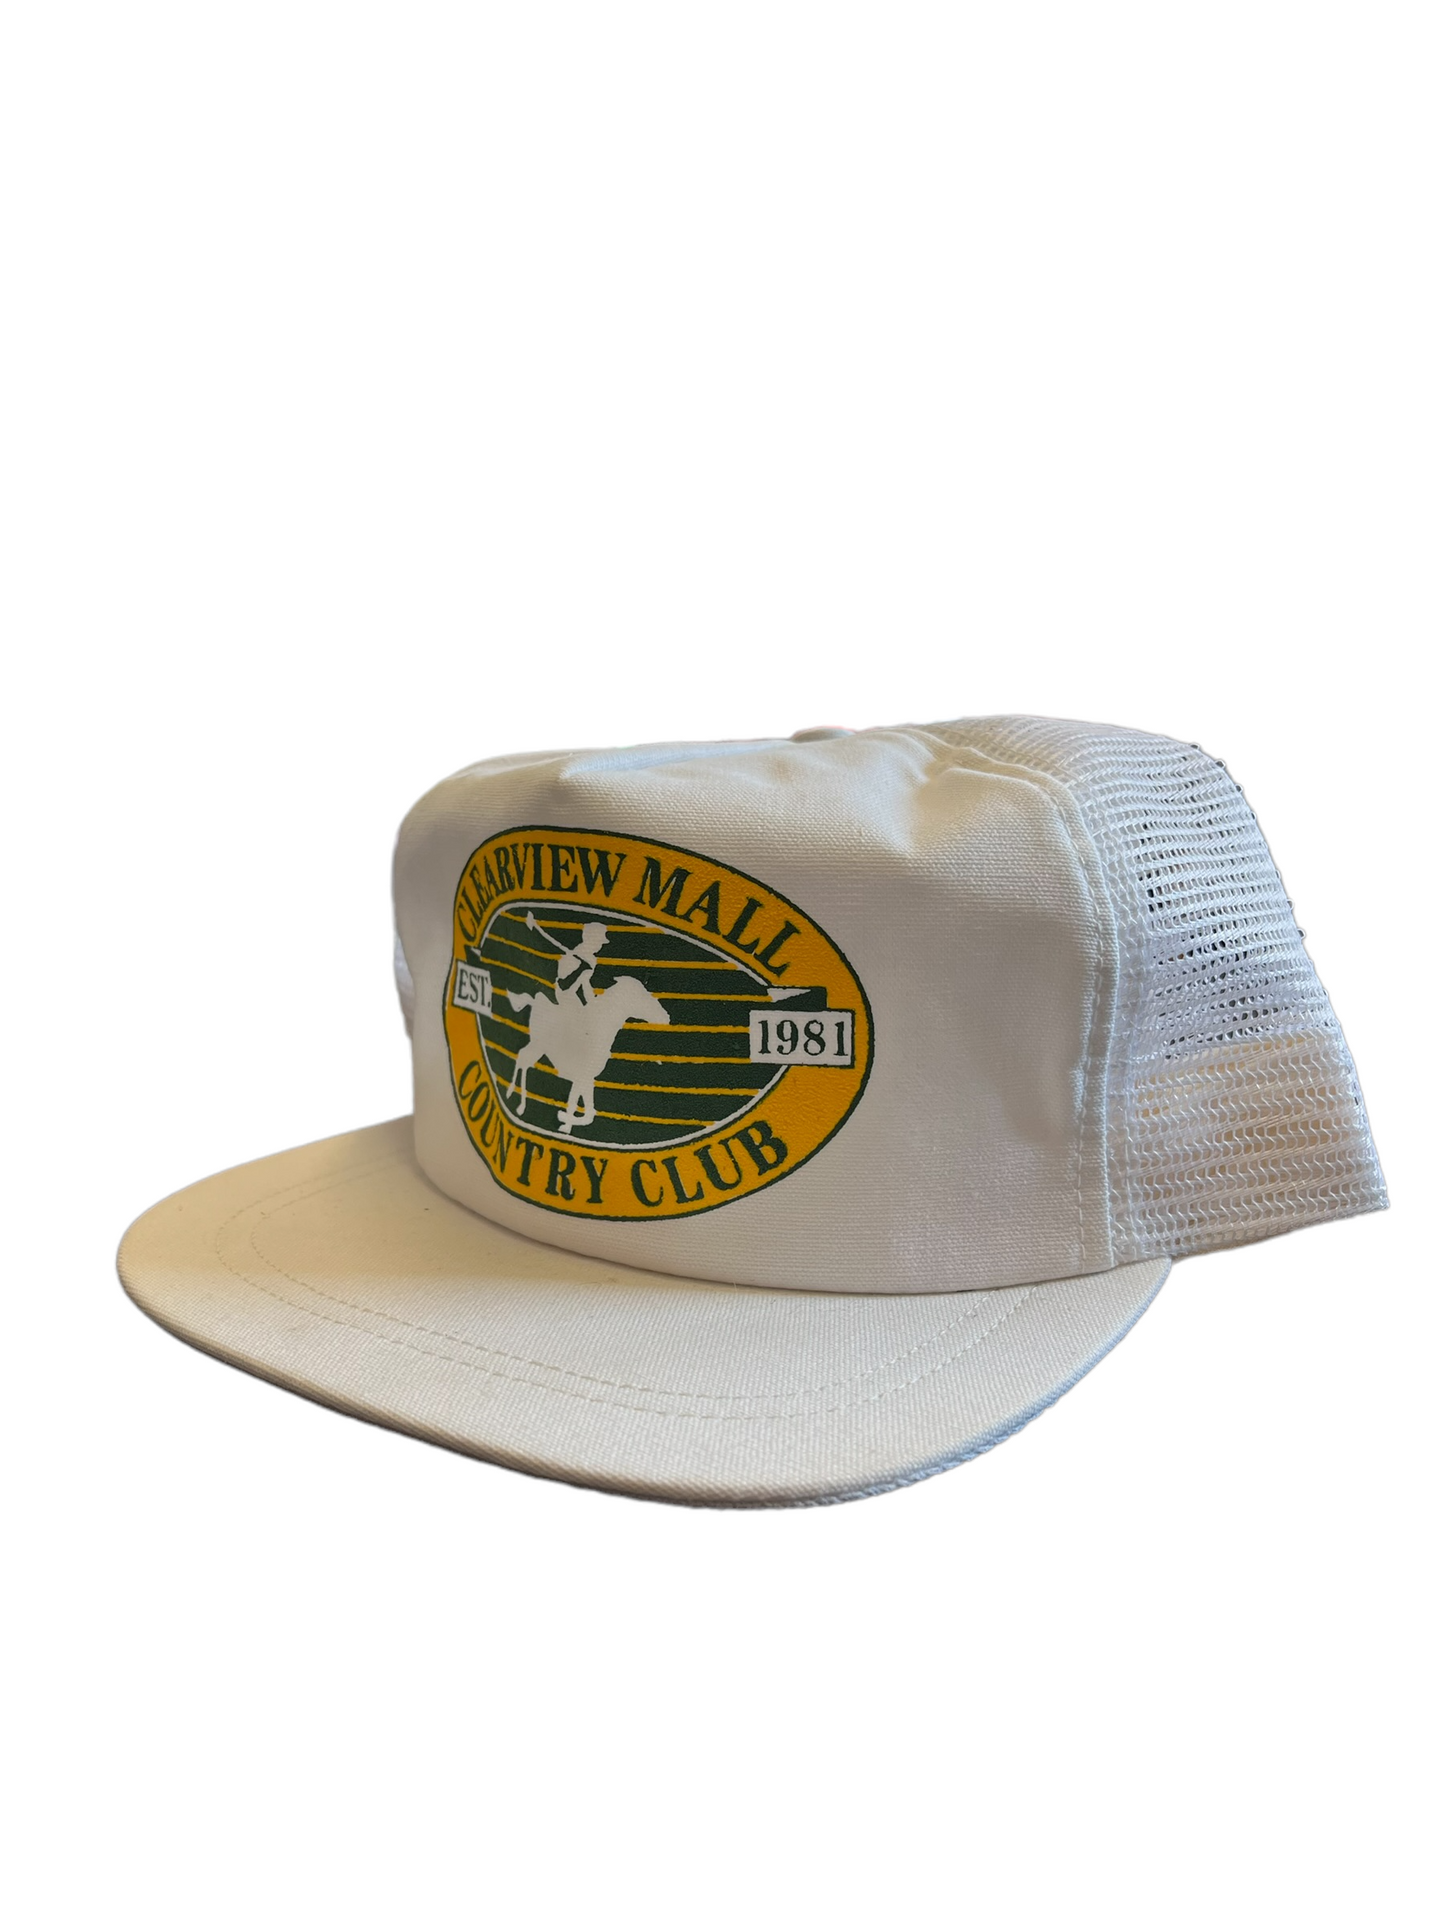 Vintage Clearview Mall Country Club Trucker Hat